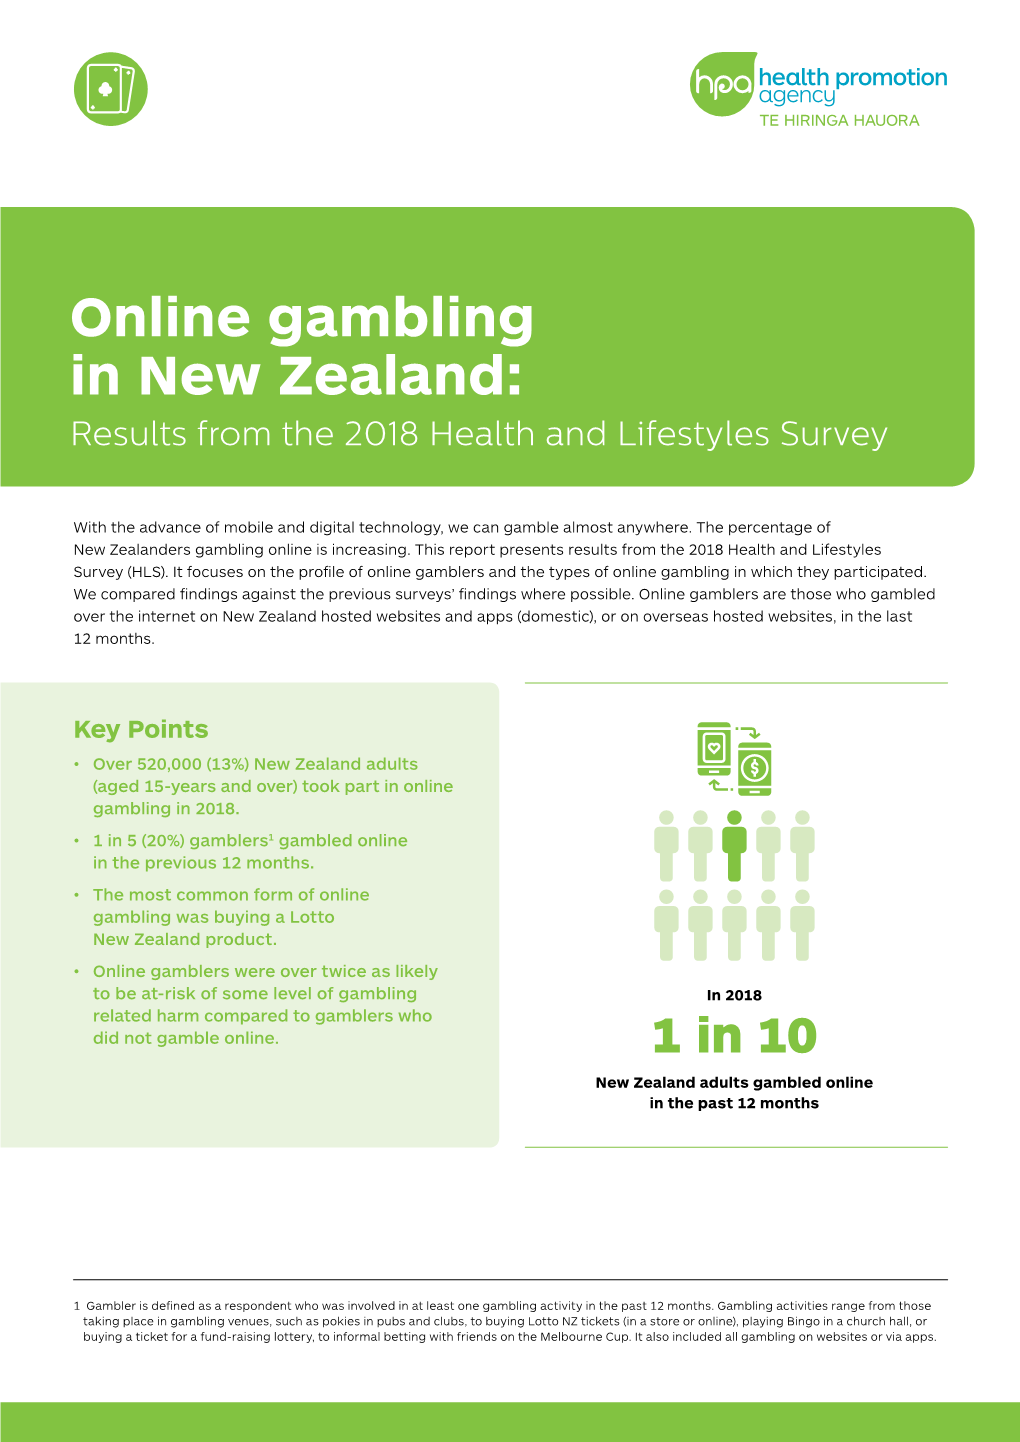 Online Gambling in New Zealand: Results from the 2018 Health and Lifestyles Survey